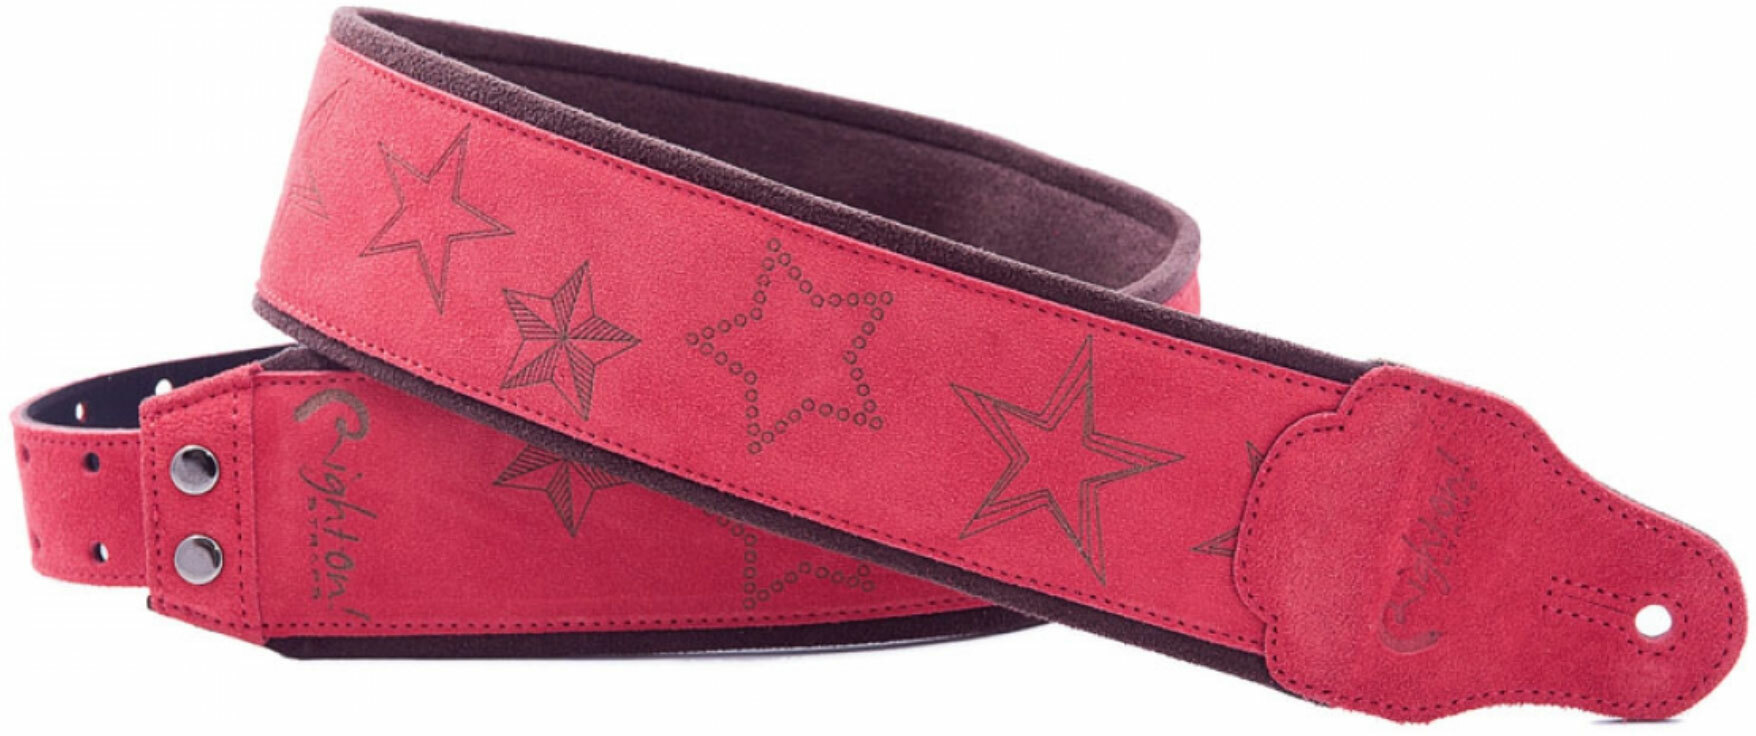 Righton Straps Jazz Stars Leather Guitar Strap Cuir 2.75inc Red - Correa - Main picture